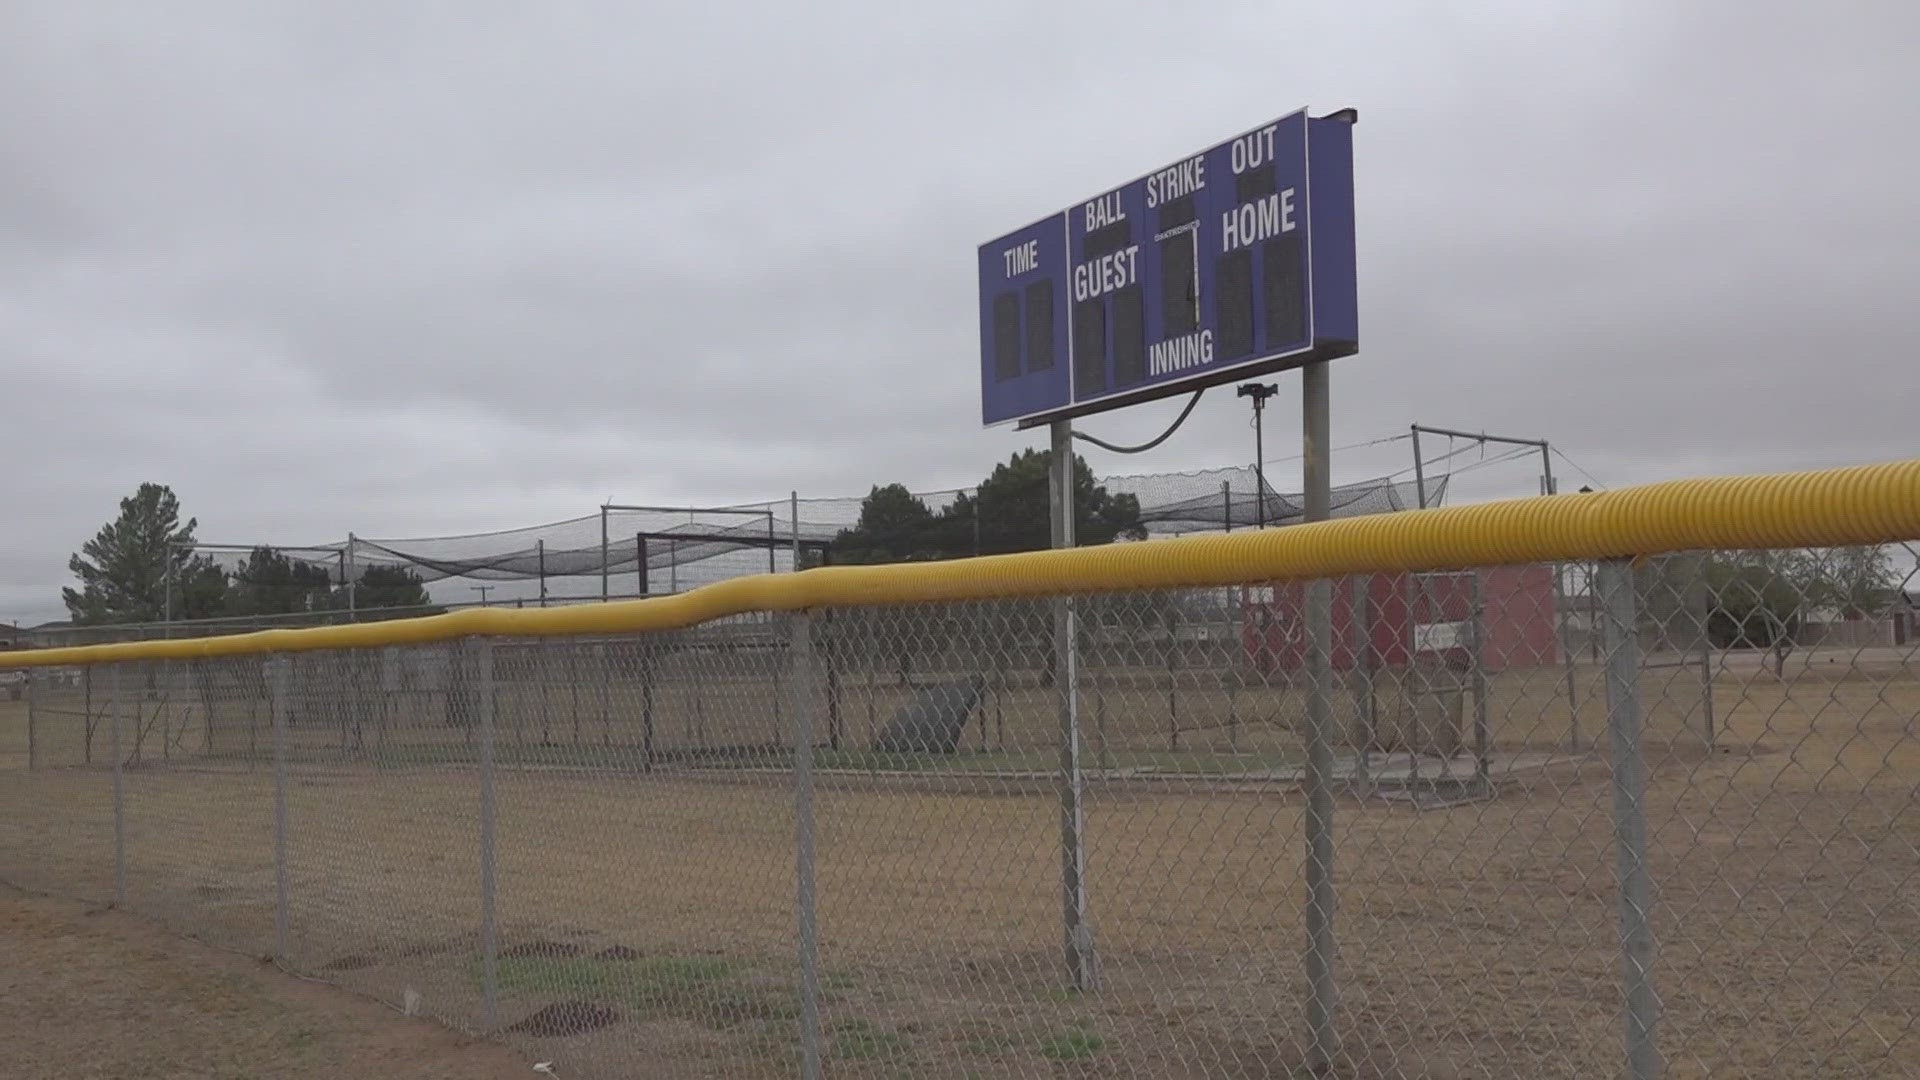 Renovations at Reyes-Mashburn-Nelms Park will add four new turf little league fields. The improvements will benefit youth and families now and in the future.